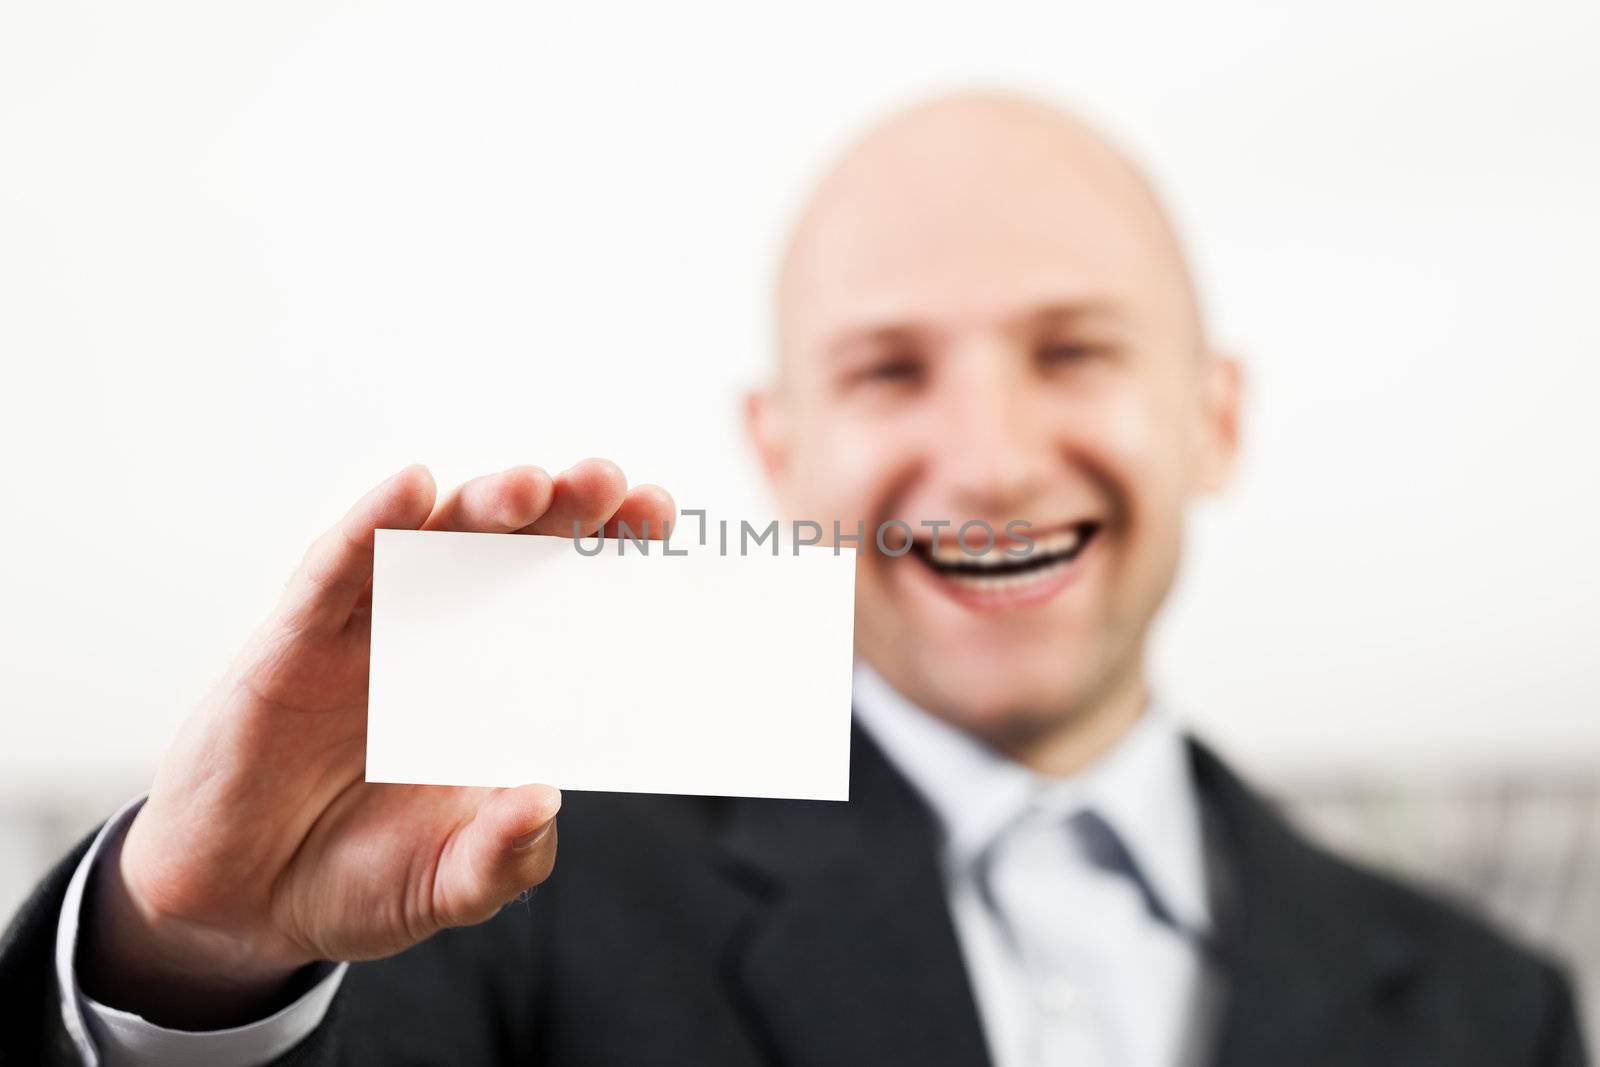 Smiling bald man hand holding blank white business card